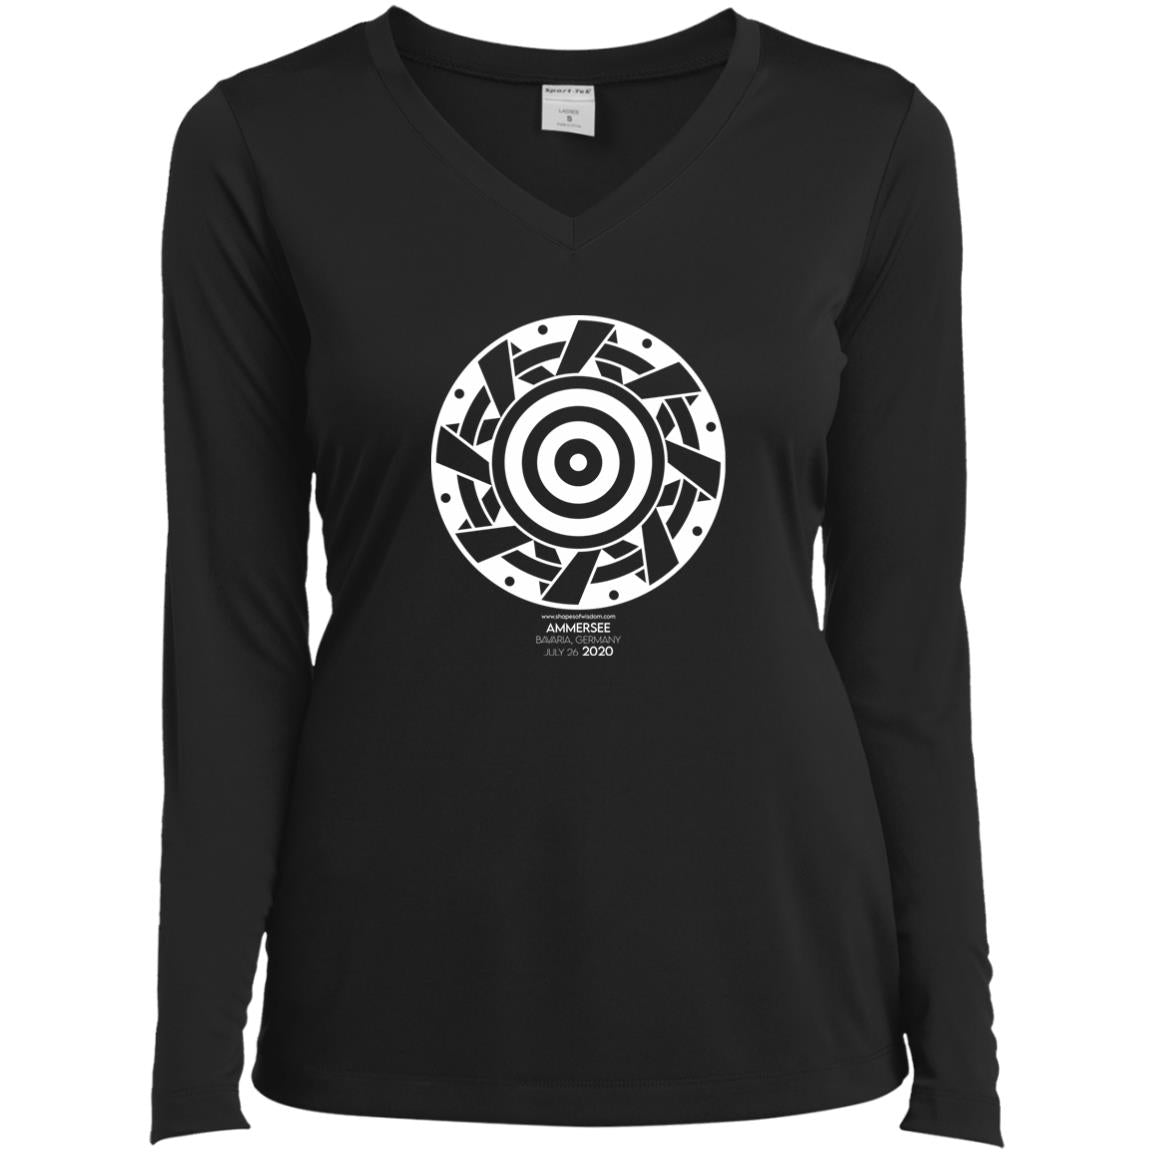 Crop Circle V-Neck Tee - Ammersee